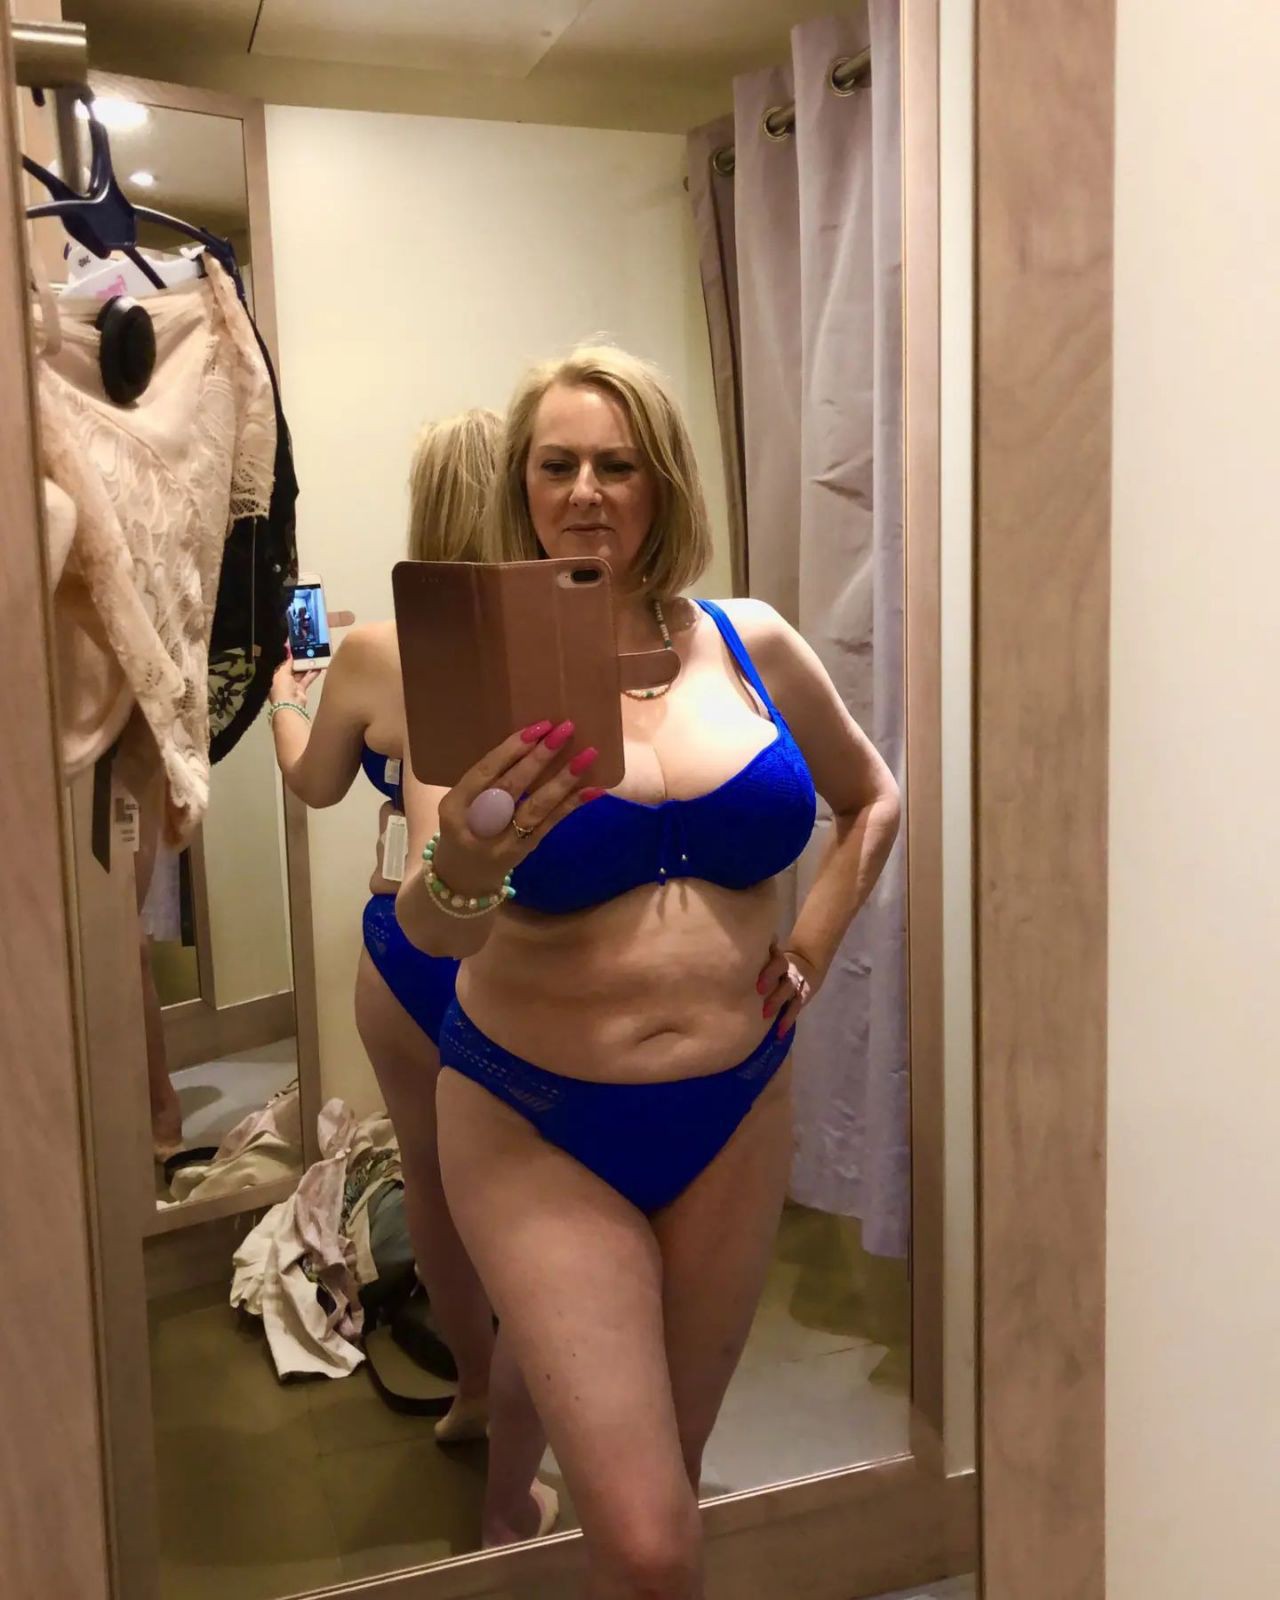 49 OLD, HOT AND SEXY EXPERIENCE MATURE WOMAN 